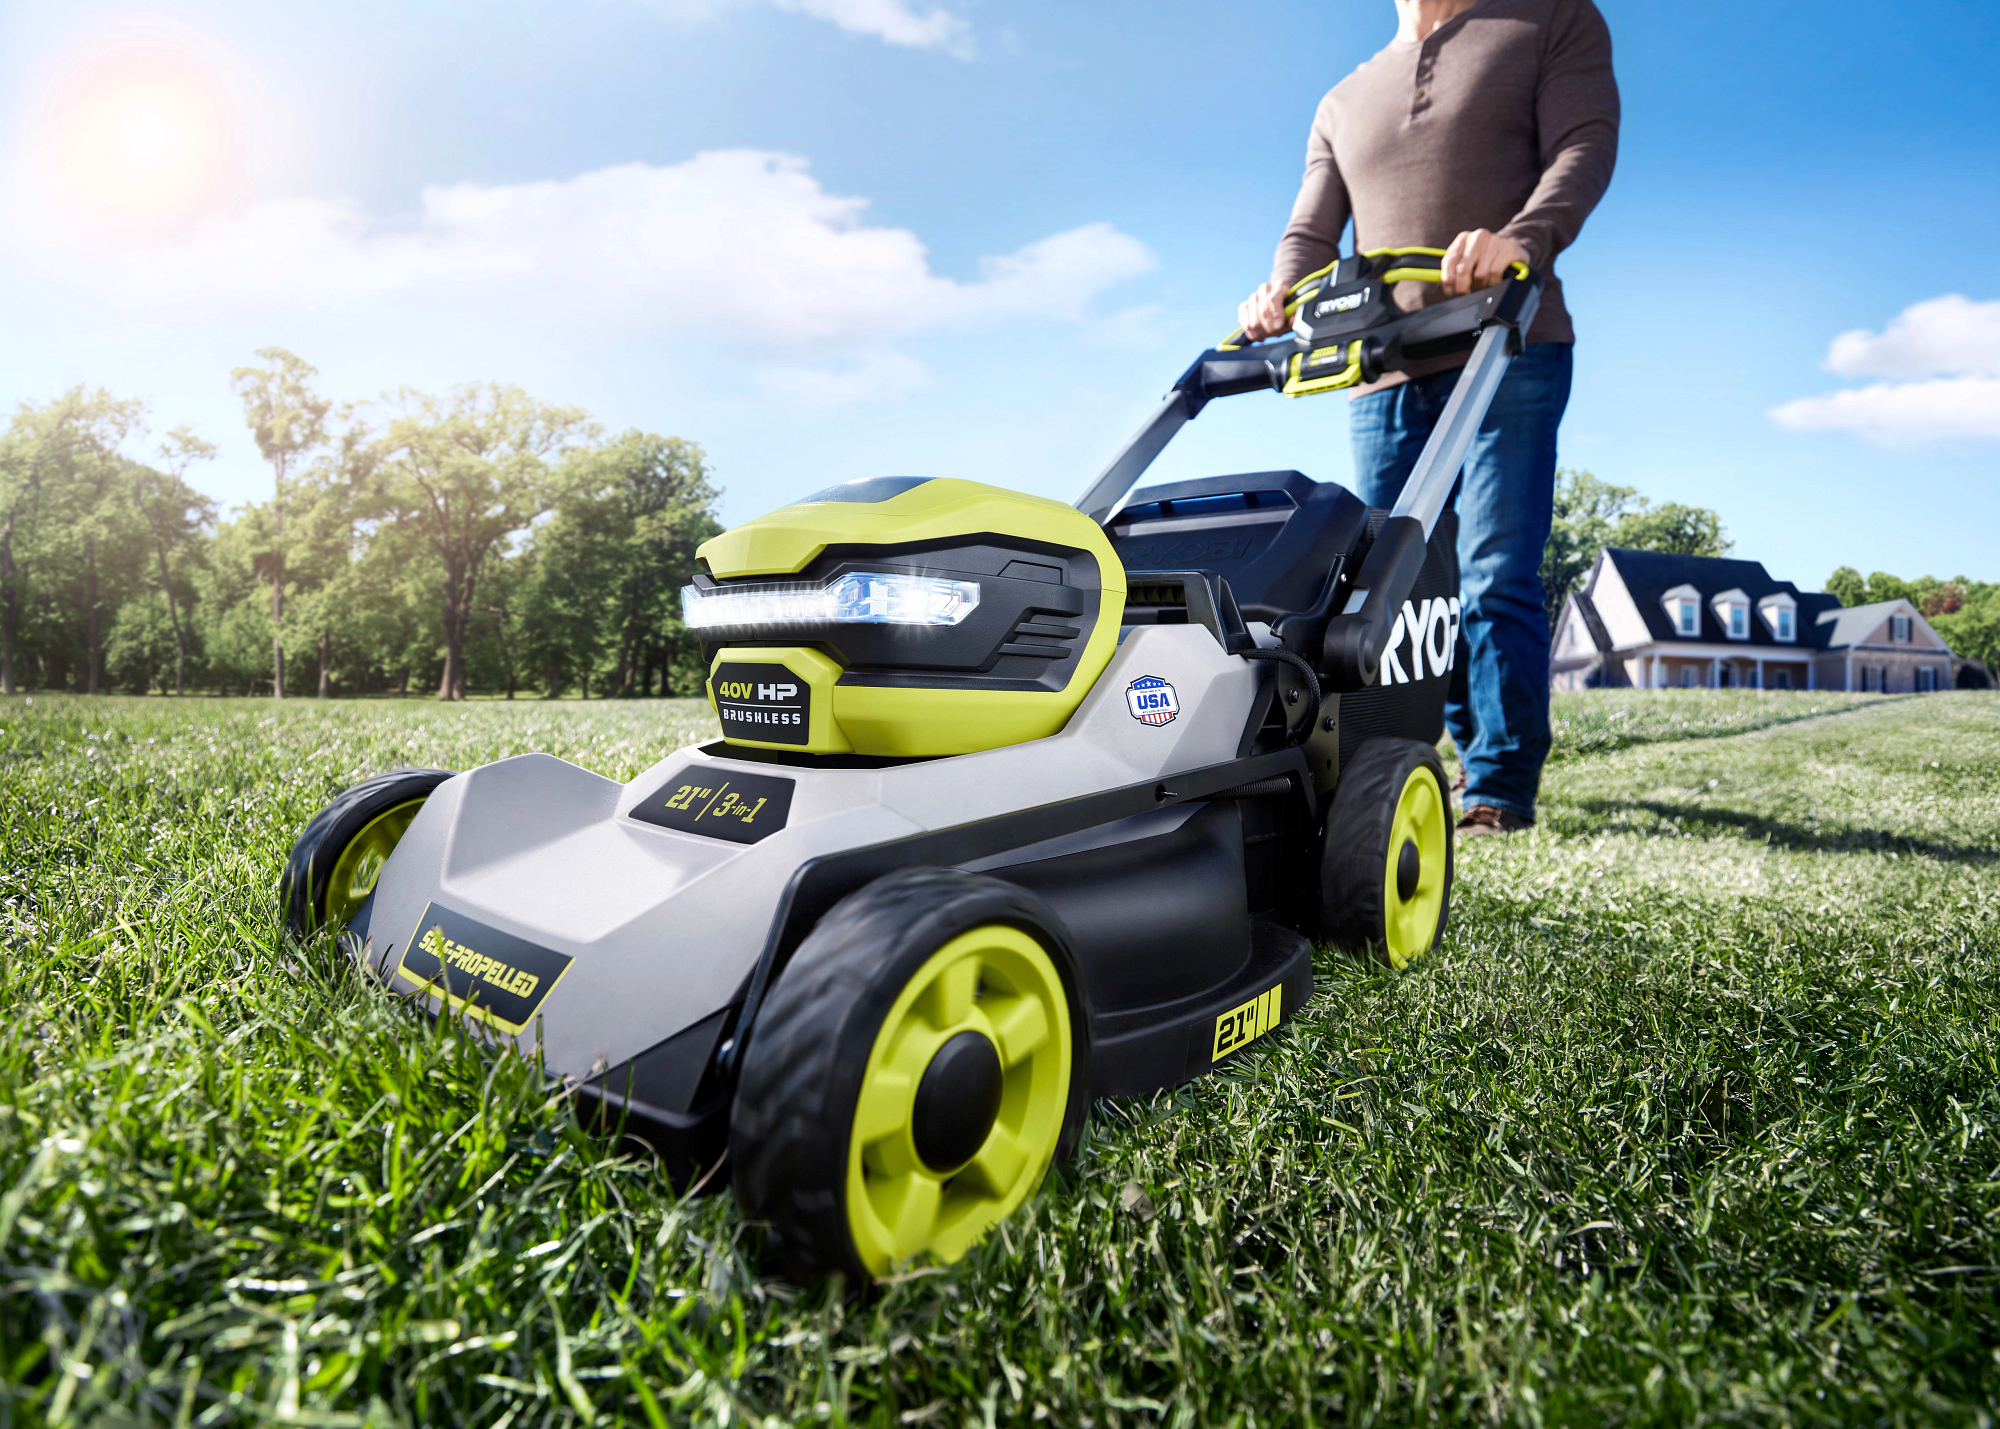 Product Features Image for 40V HP BRUSHLESS 21" SELF-PROPELLED LAWN MOWER KIT.